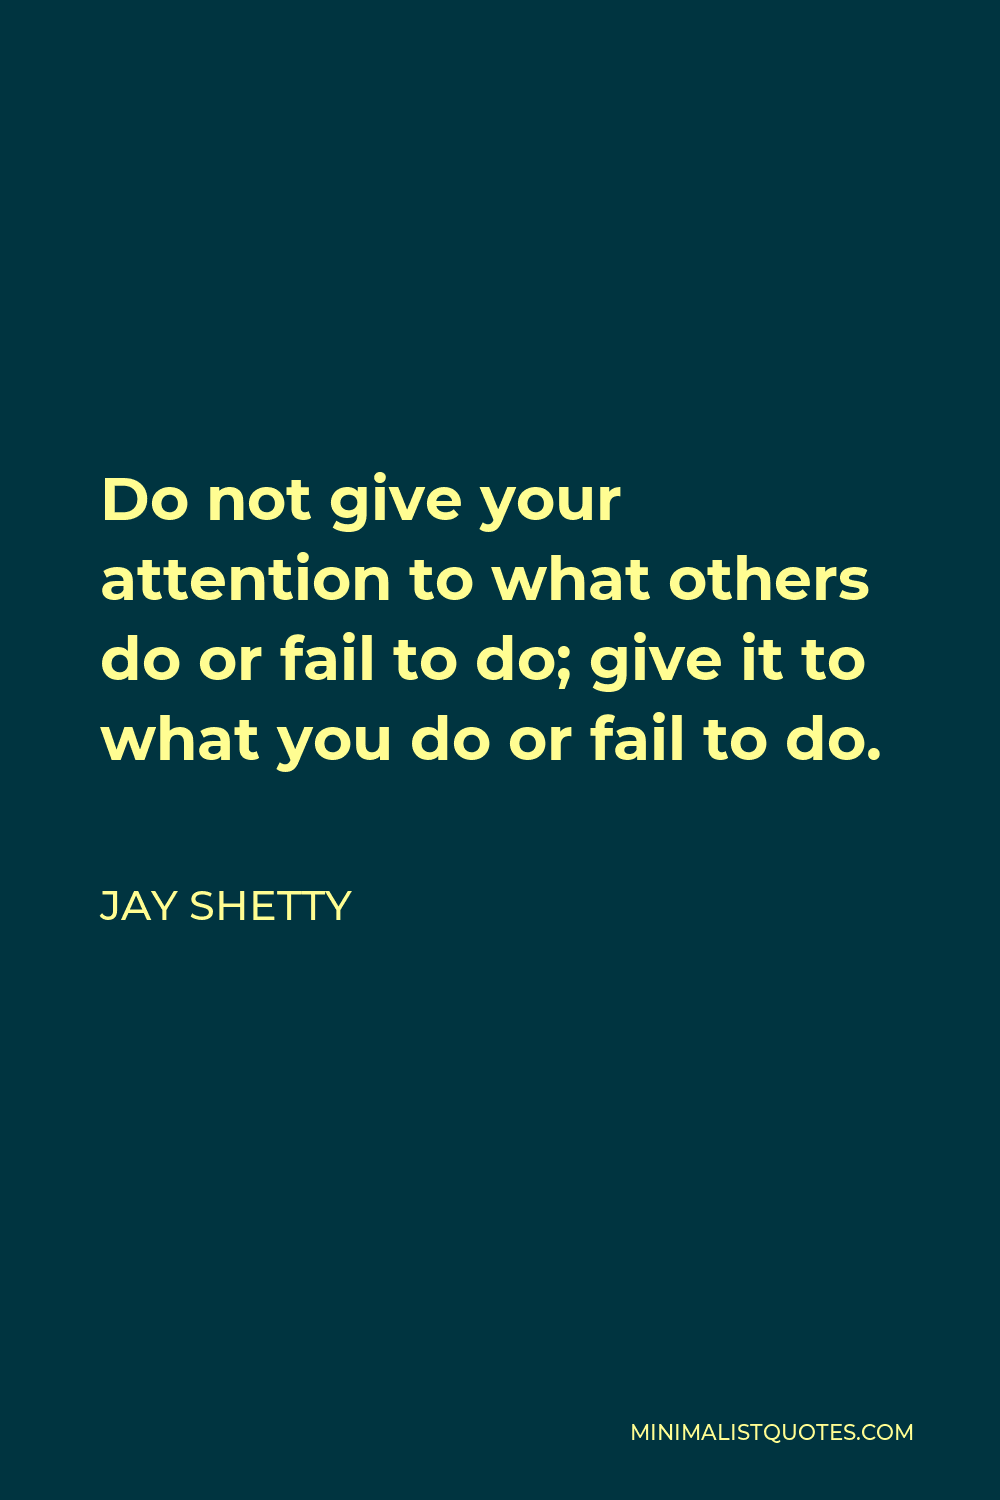 Jay Shetty Quote - Do not give your attention to what others do or fail to do; give it to what you do or fail to do.